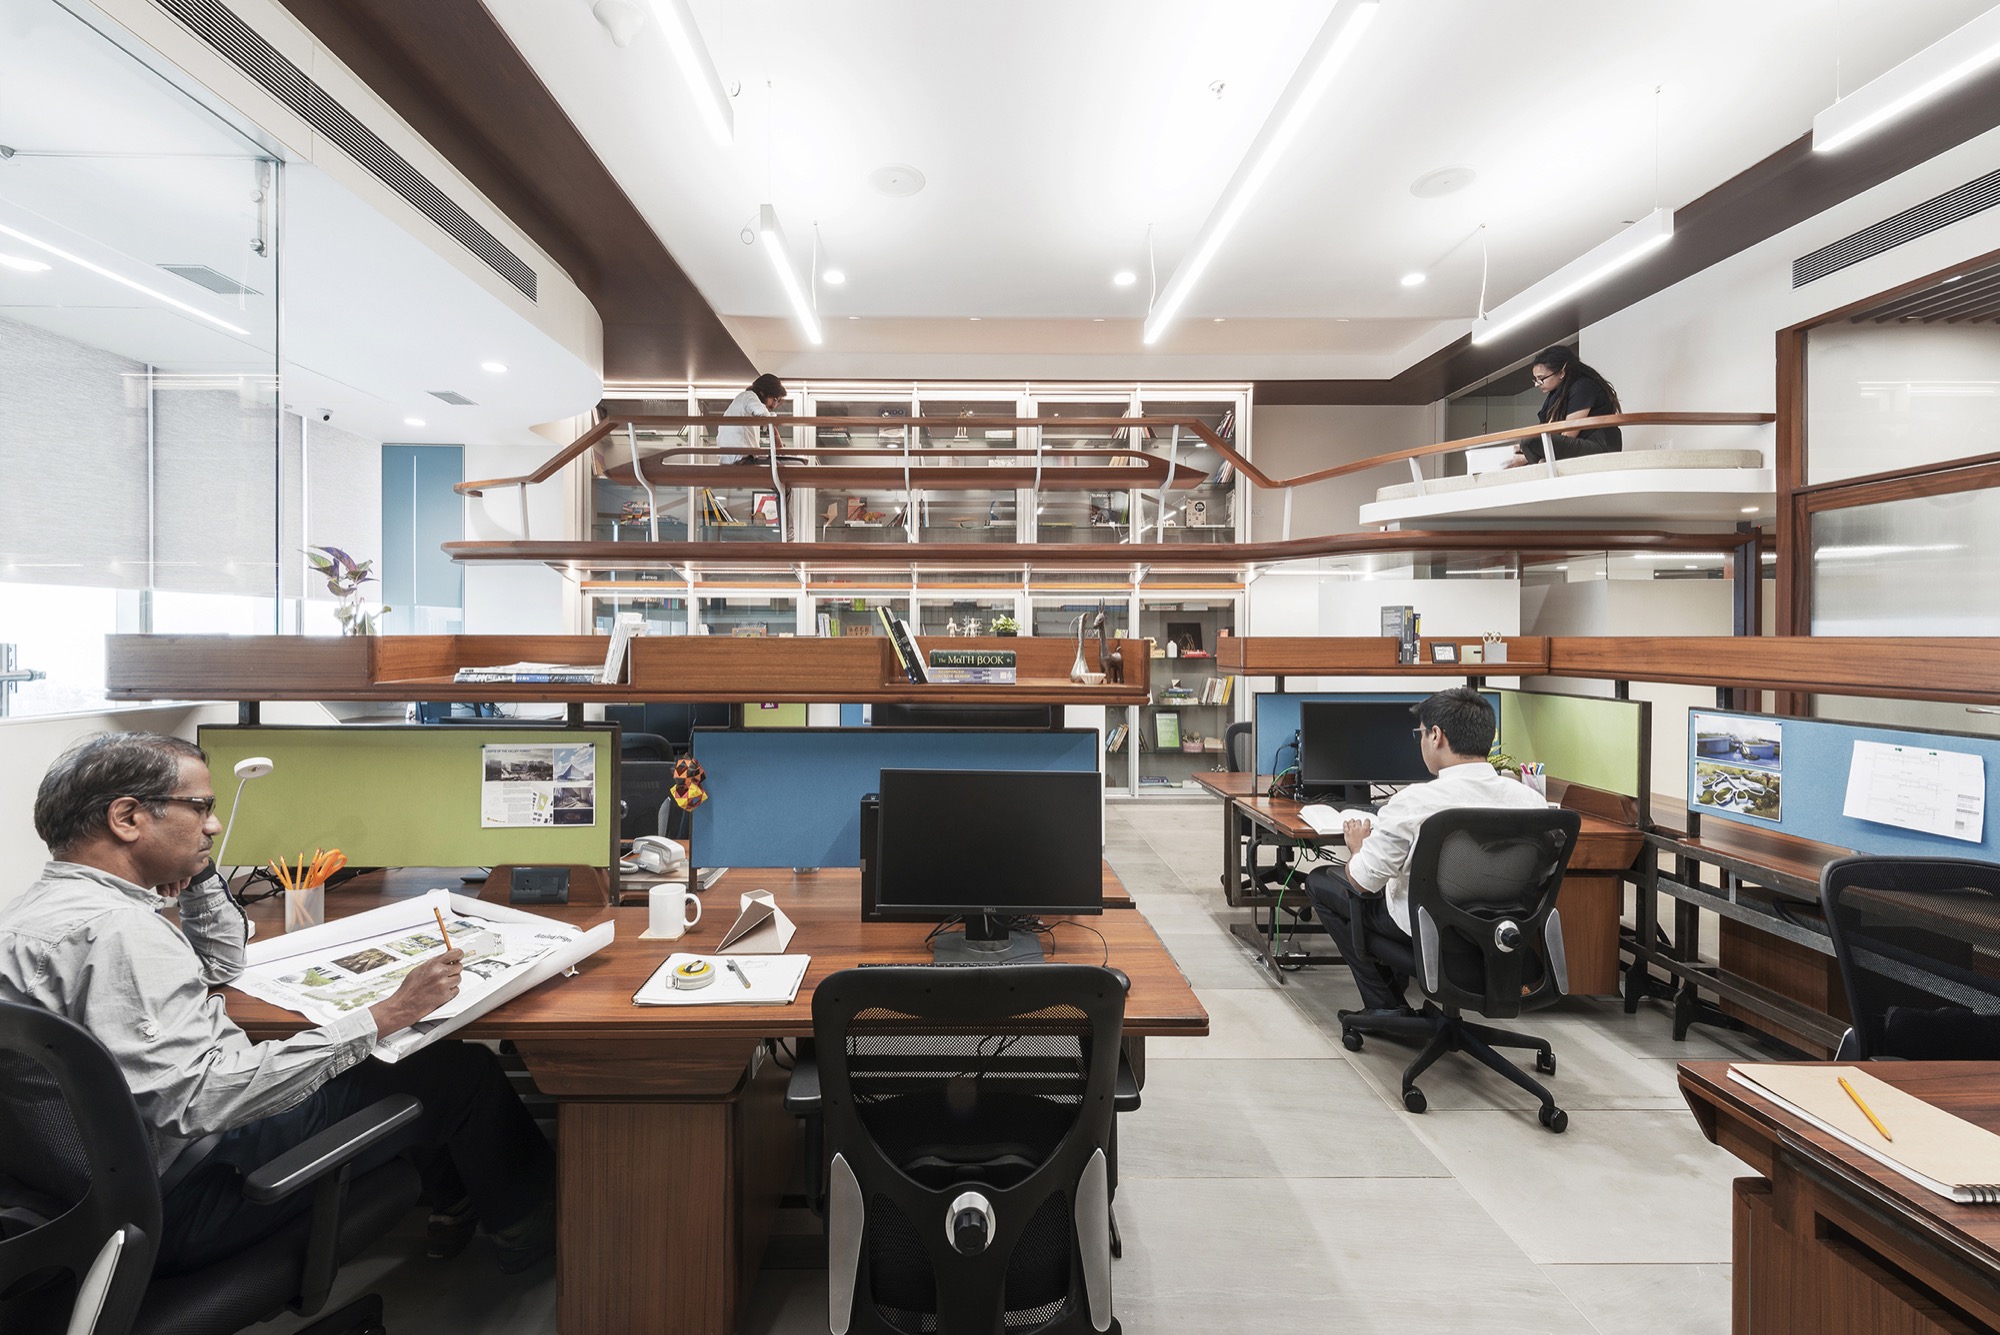 The Engineers' Office at Mumbai, by JDAP Design - Architecture - Planning